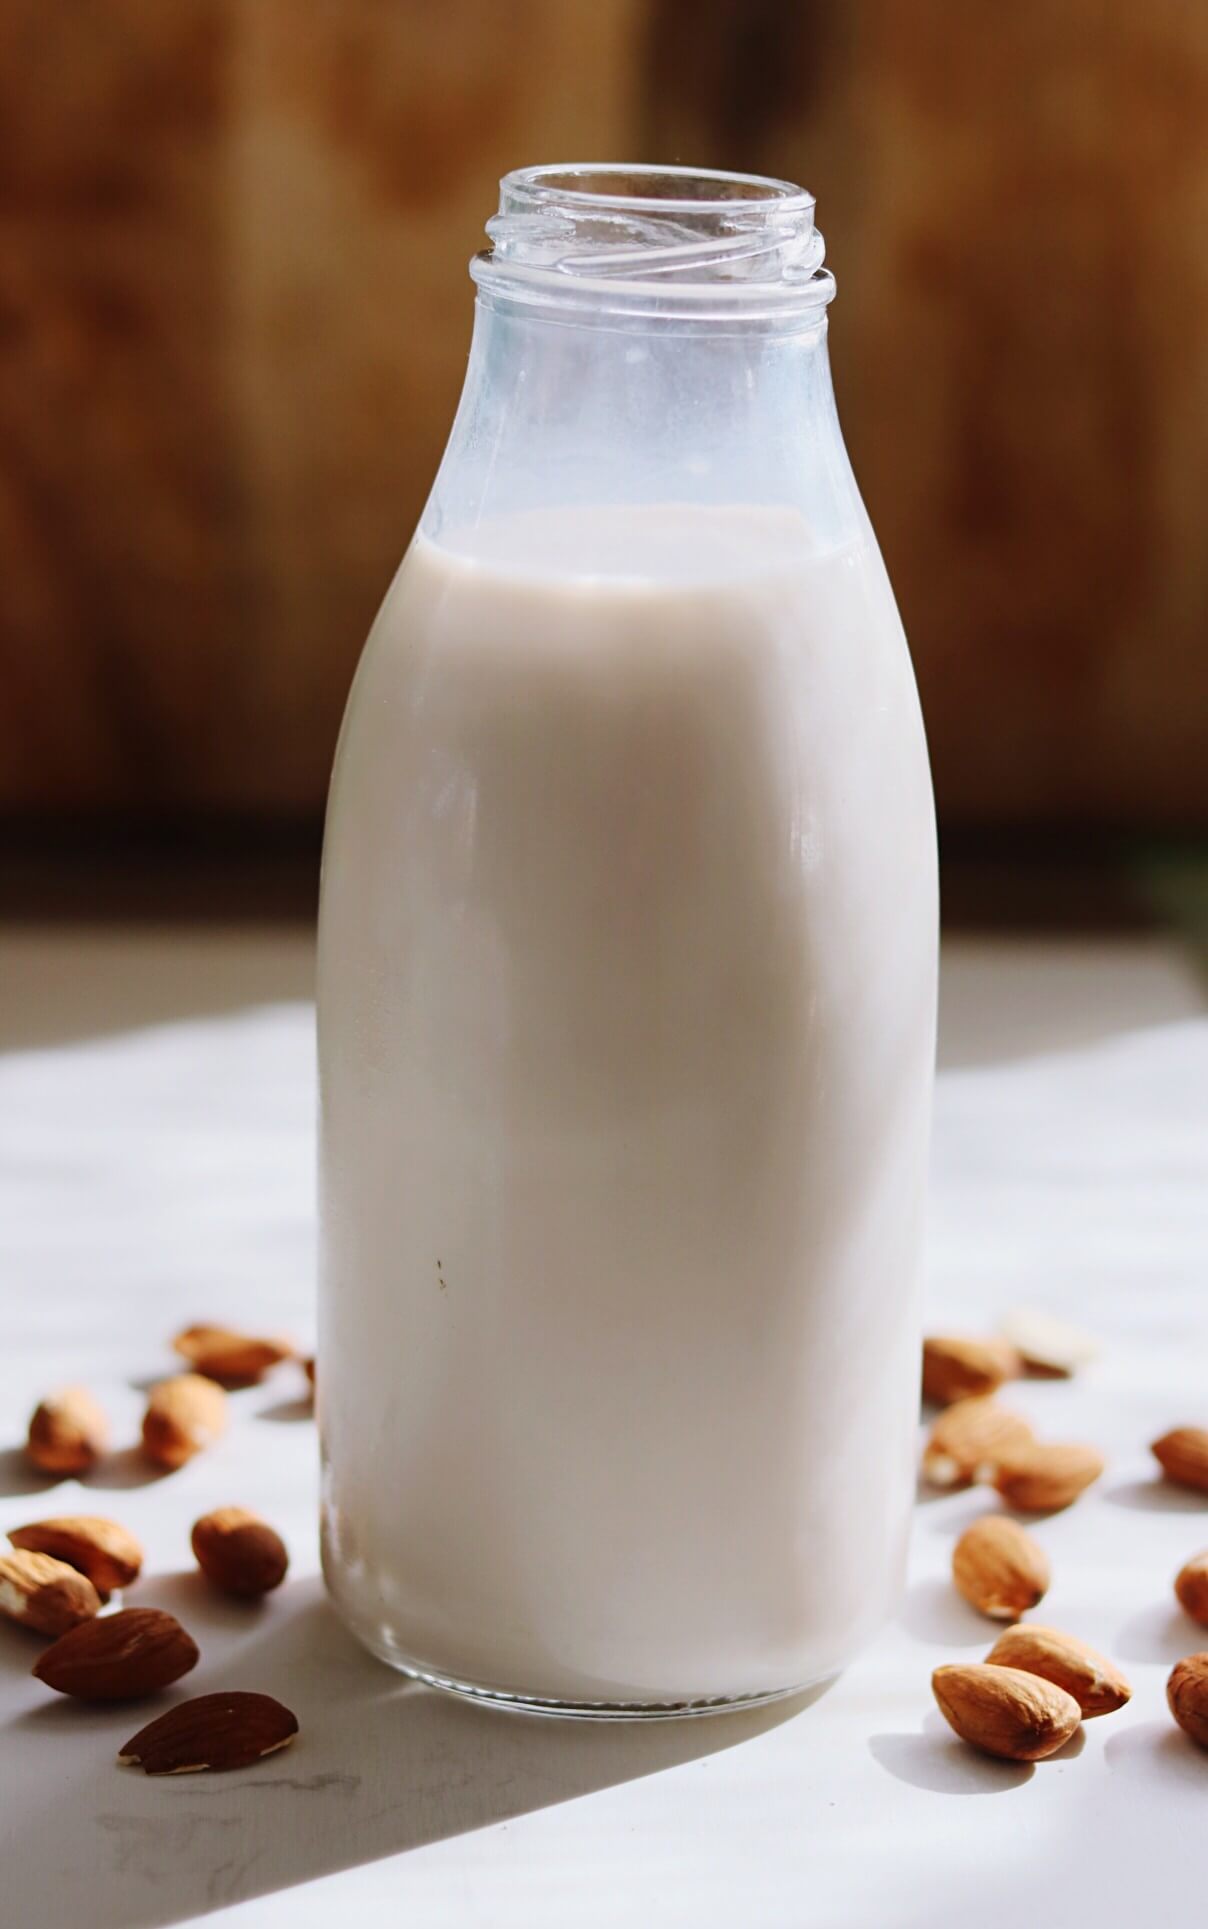 almond milk in milk bottle on table surrounded by almonds